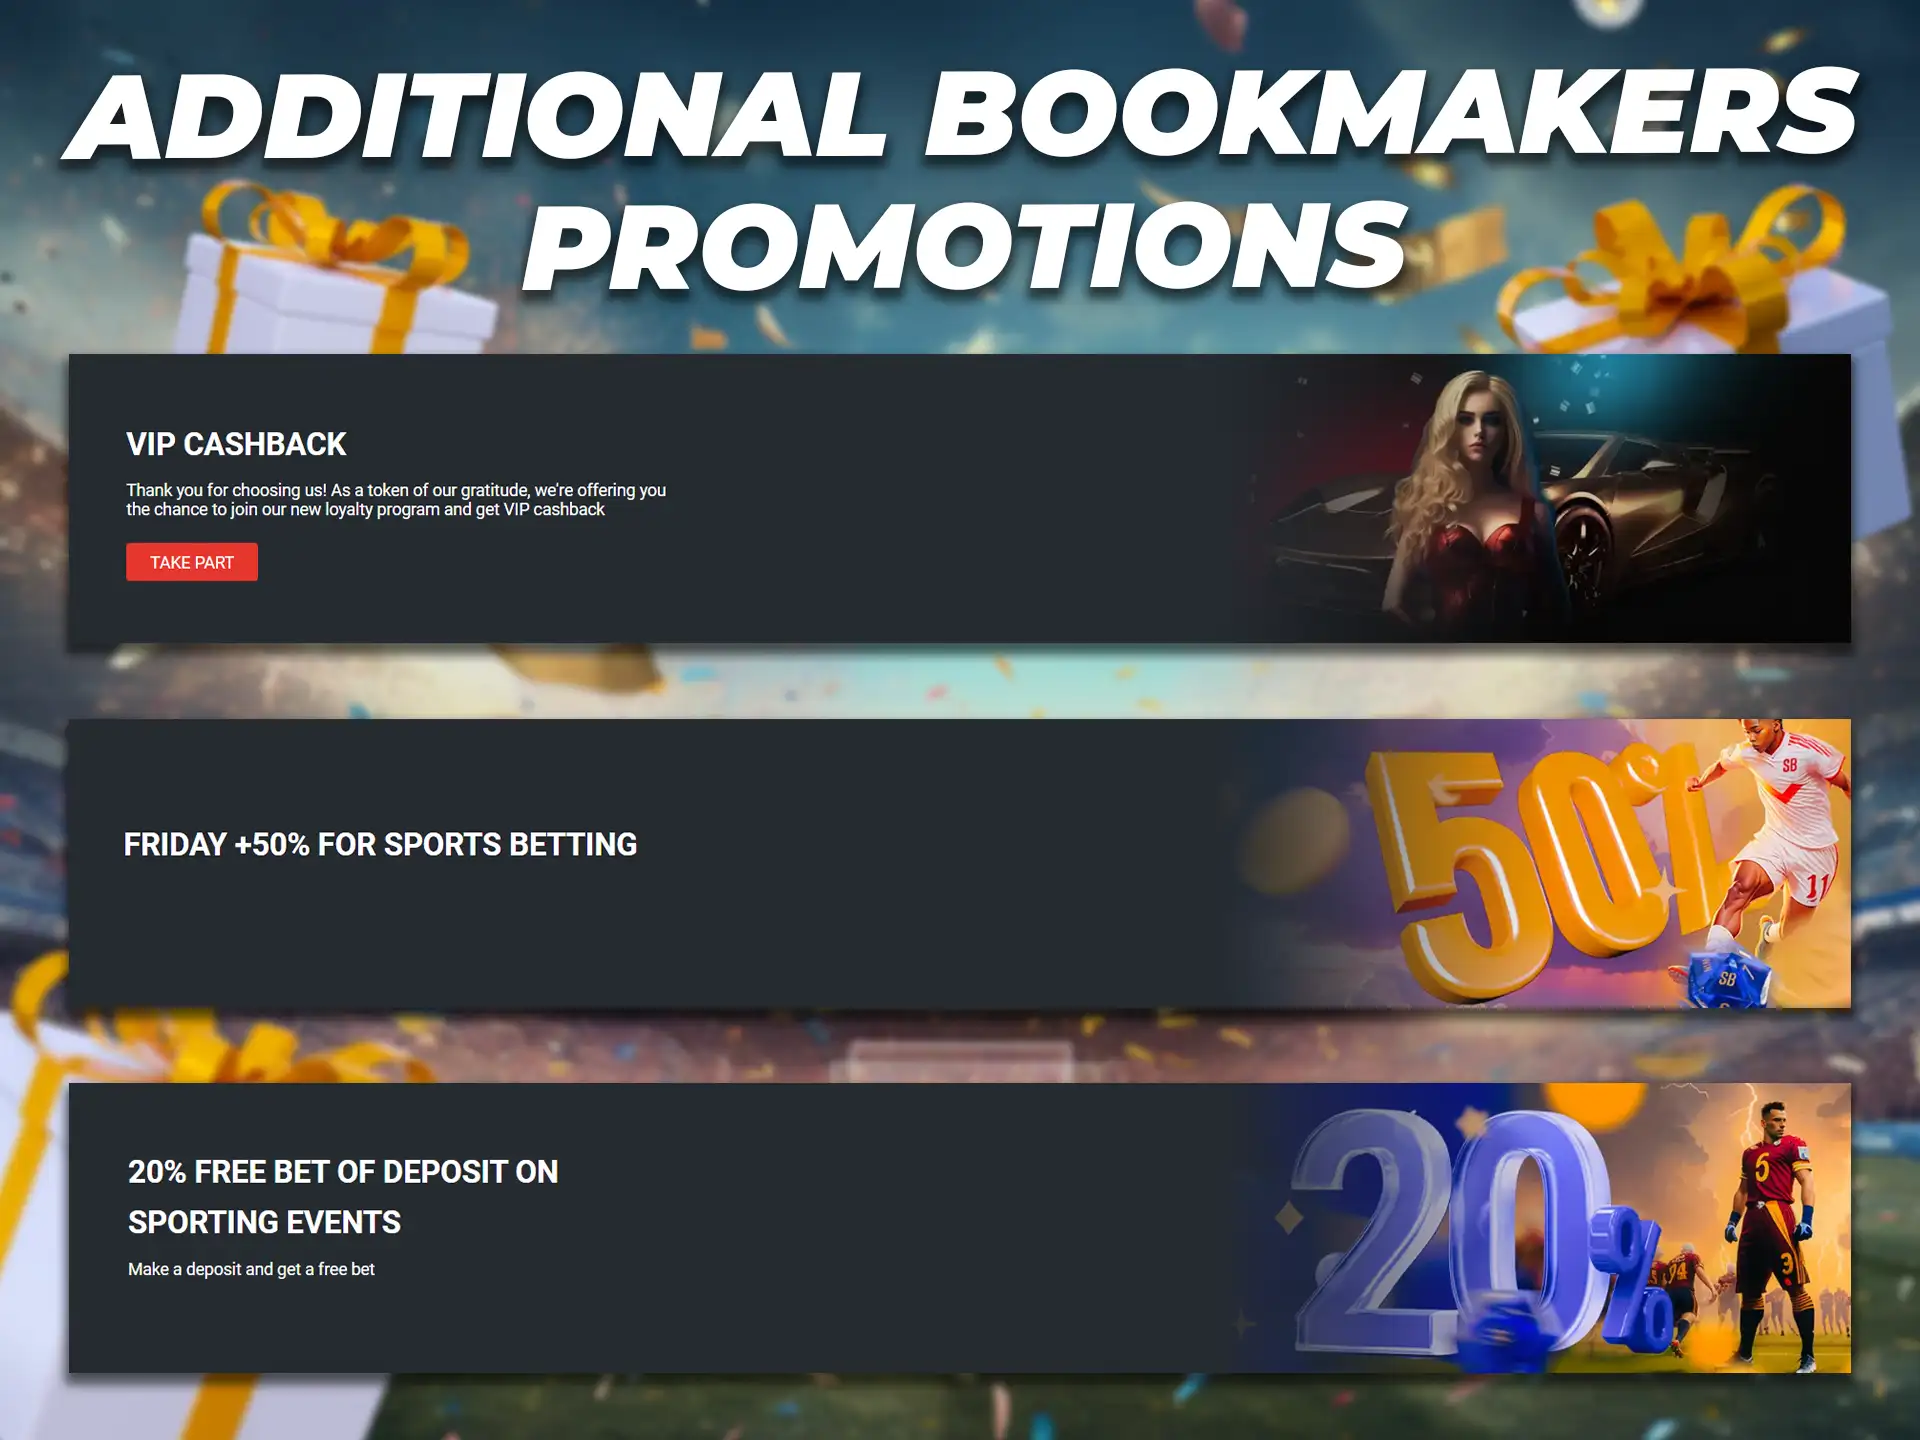 There are many additional bookmaker promotions for regular players.